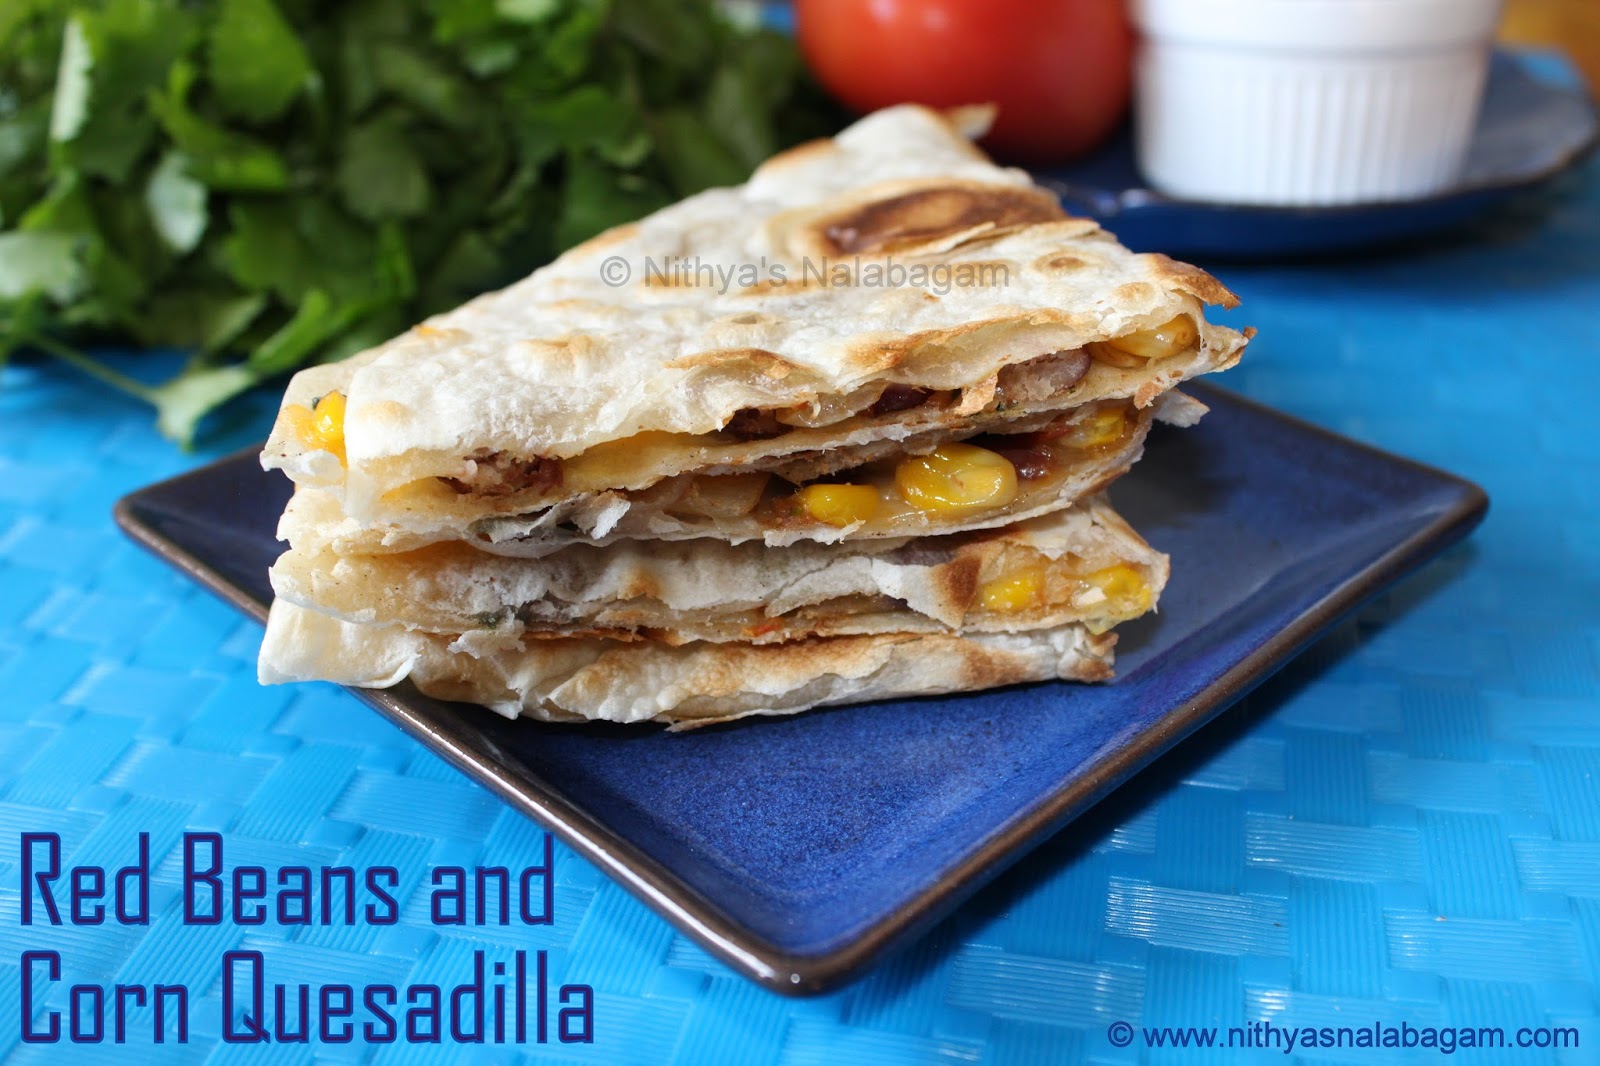 Red beans and Corn Quesadilla